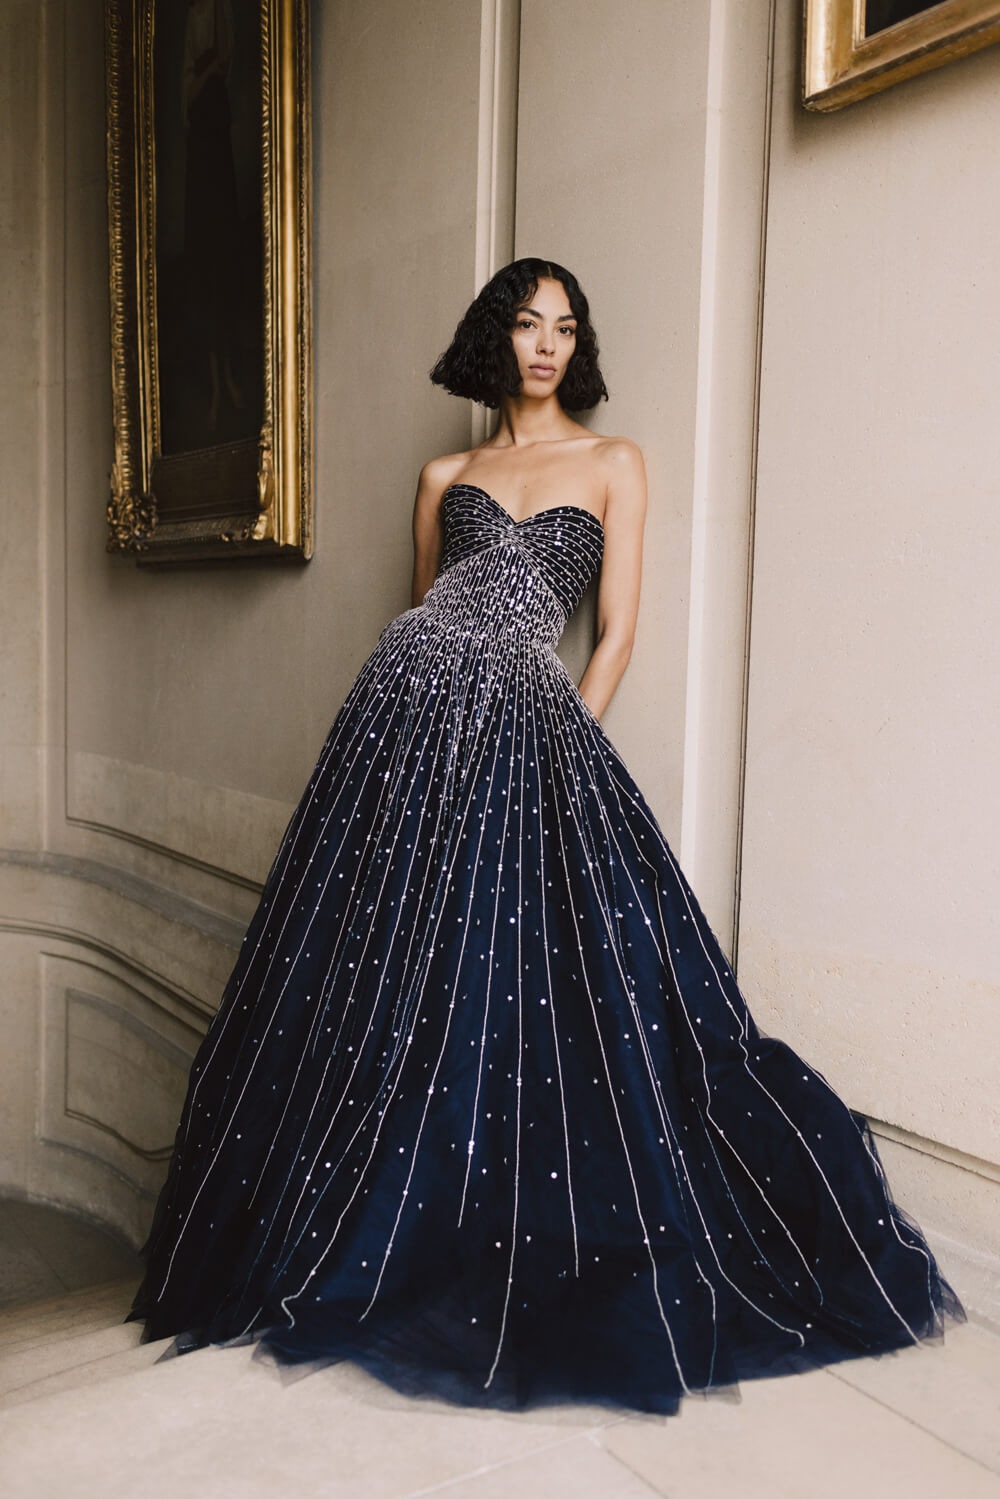 Monique Lhuillier strapless ballgown with sweetheart neckline in midnight tulle and silver embroidery.